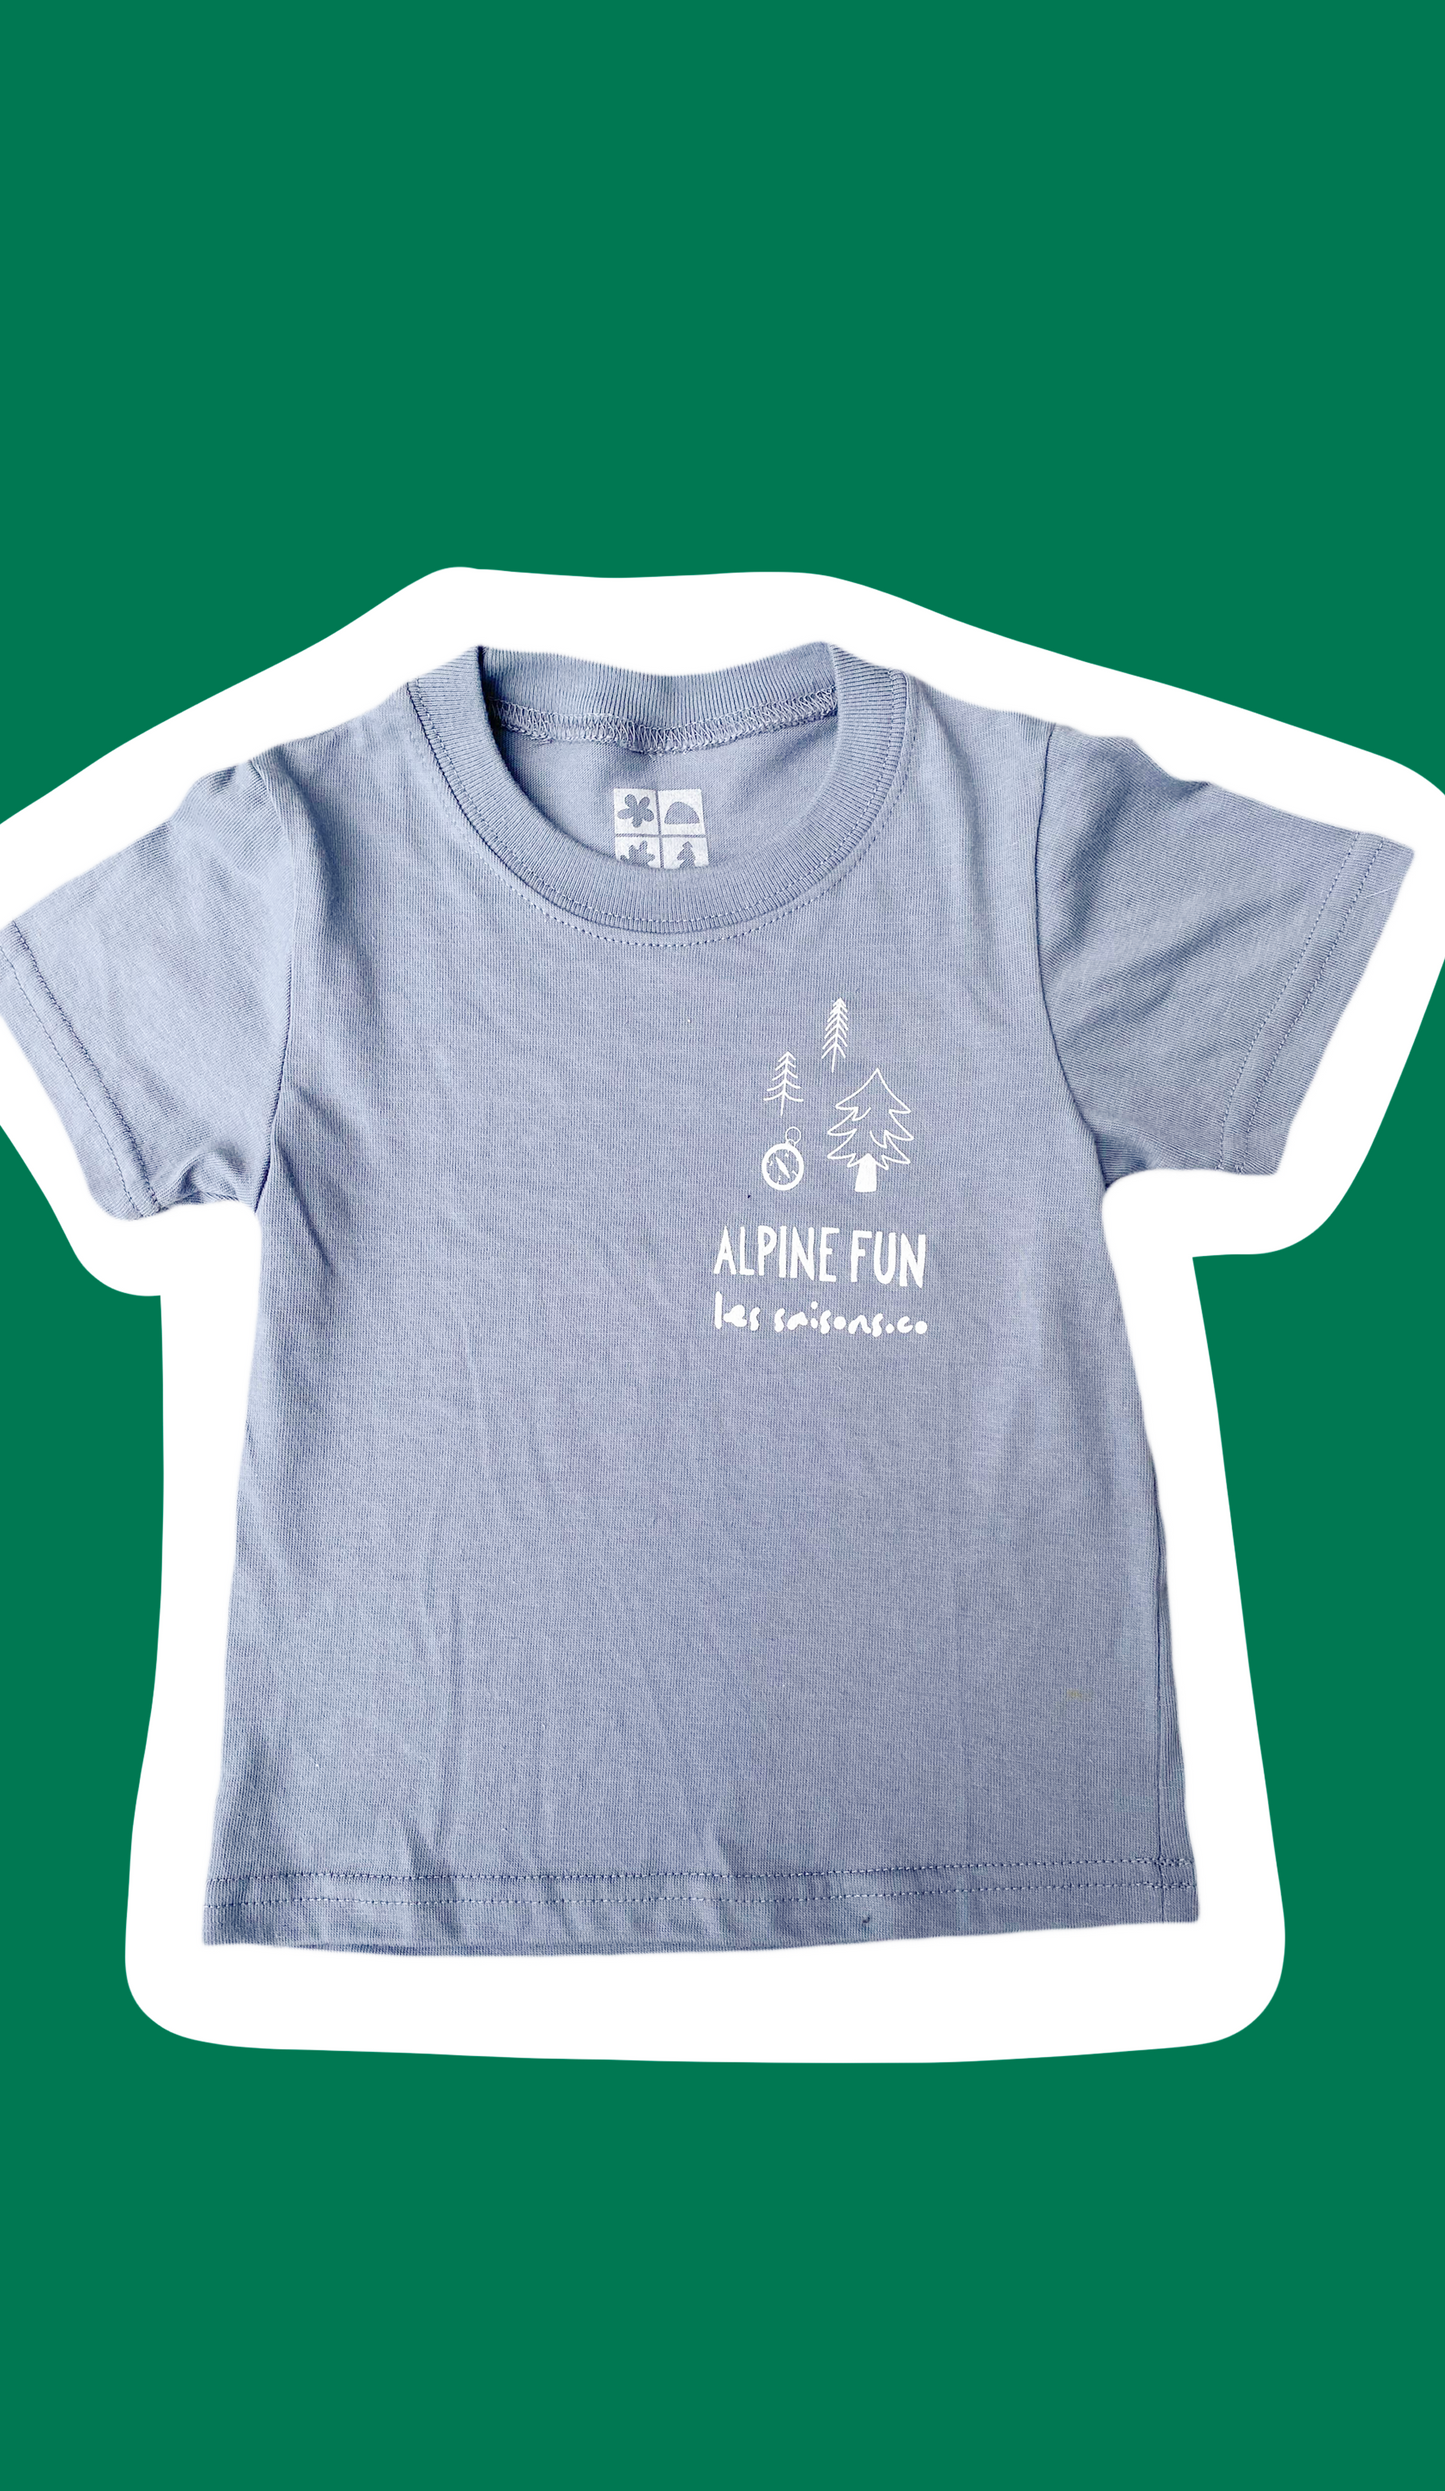 alpine fun shirt for kids, made in canada, comfortable and cute. Les saisons illustration of a bear, mountains and a camping tent. Light blue grey color